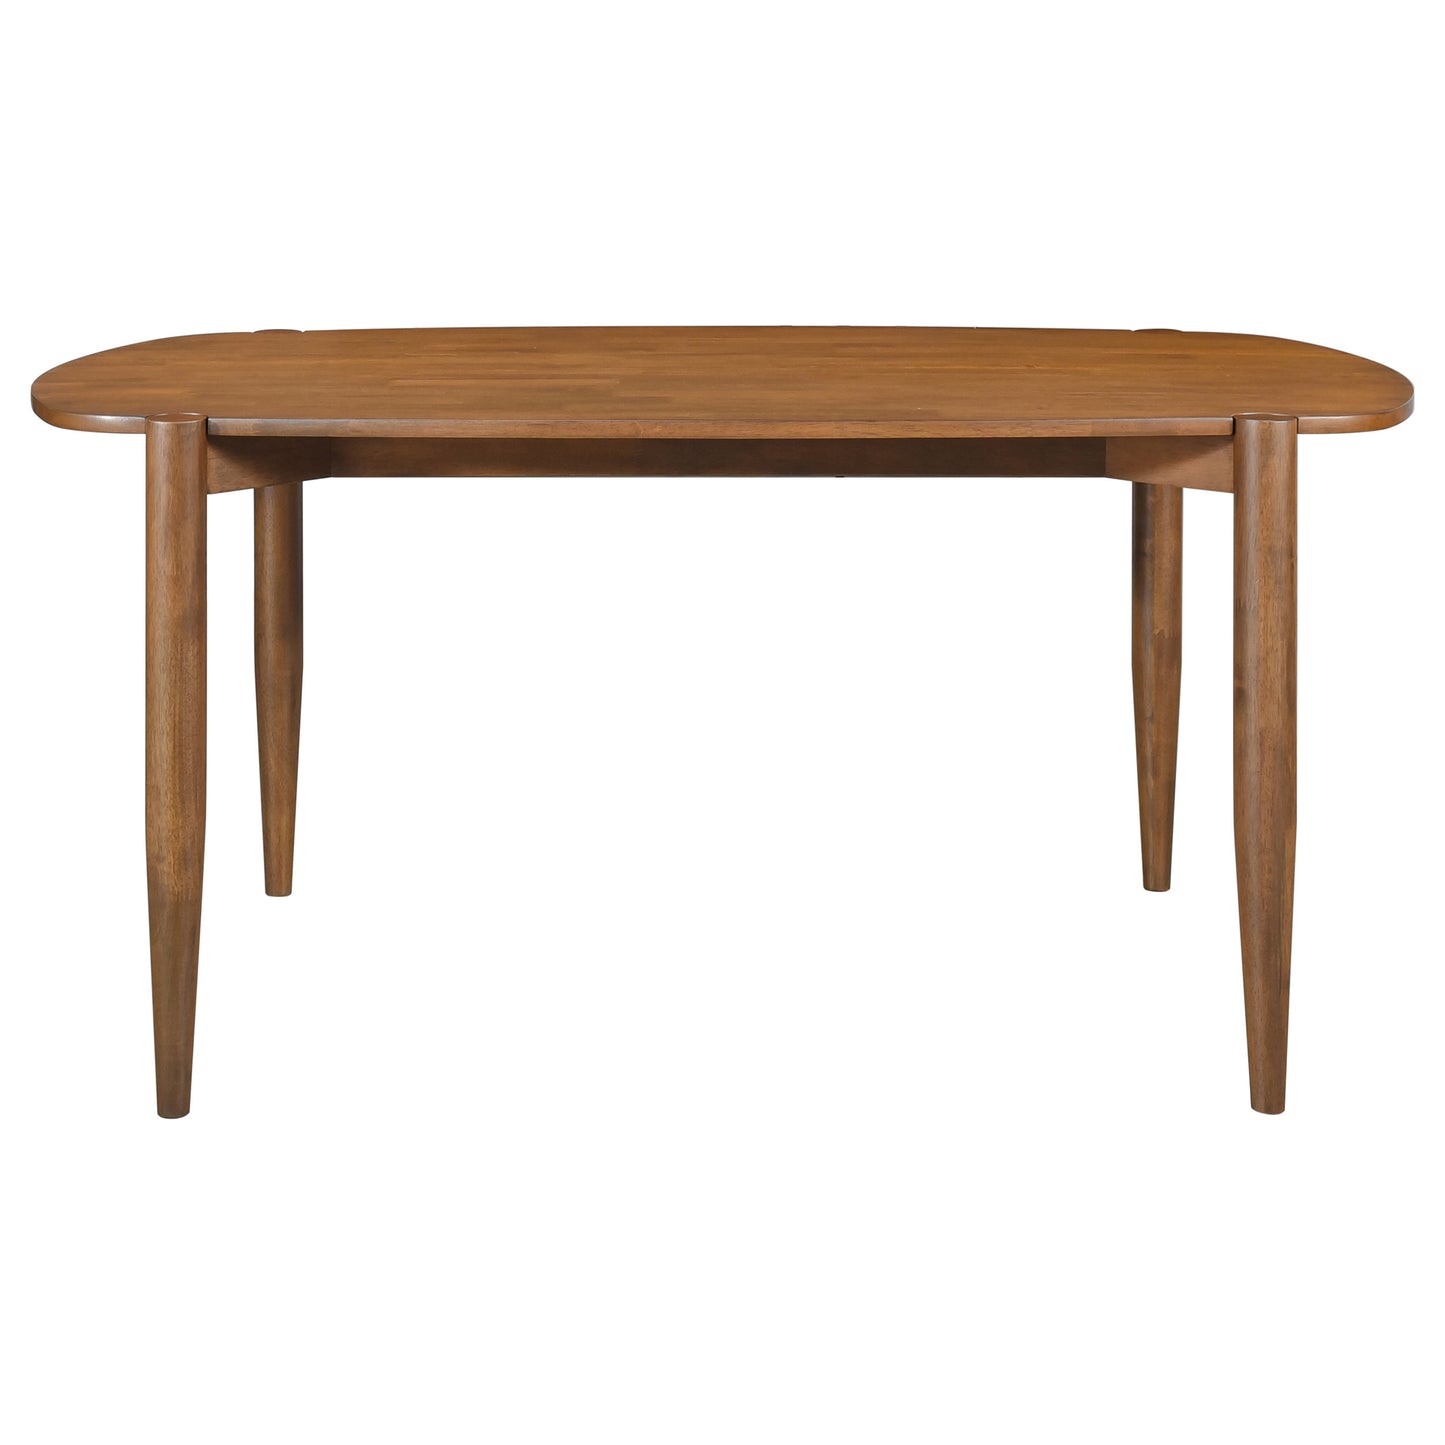 Dortch Oval Solid Wood Dining Table Walnut